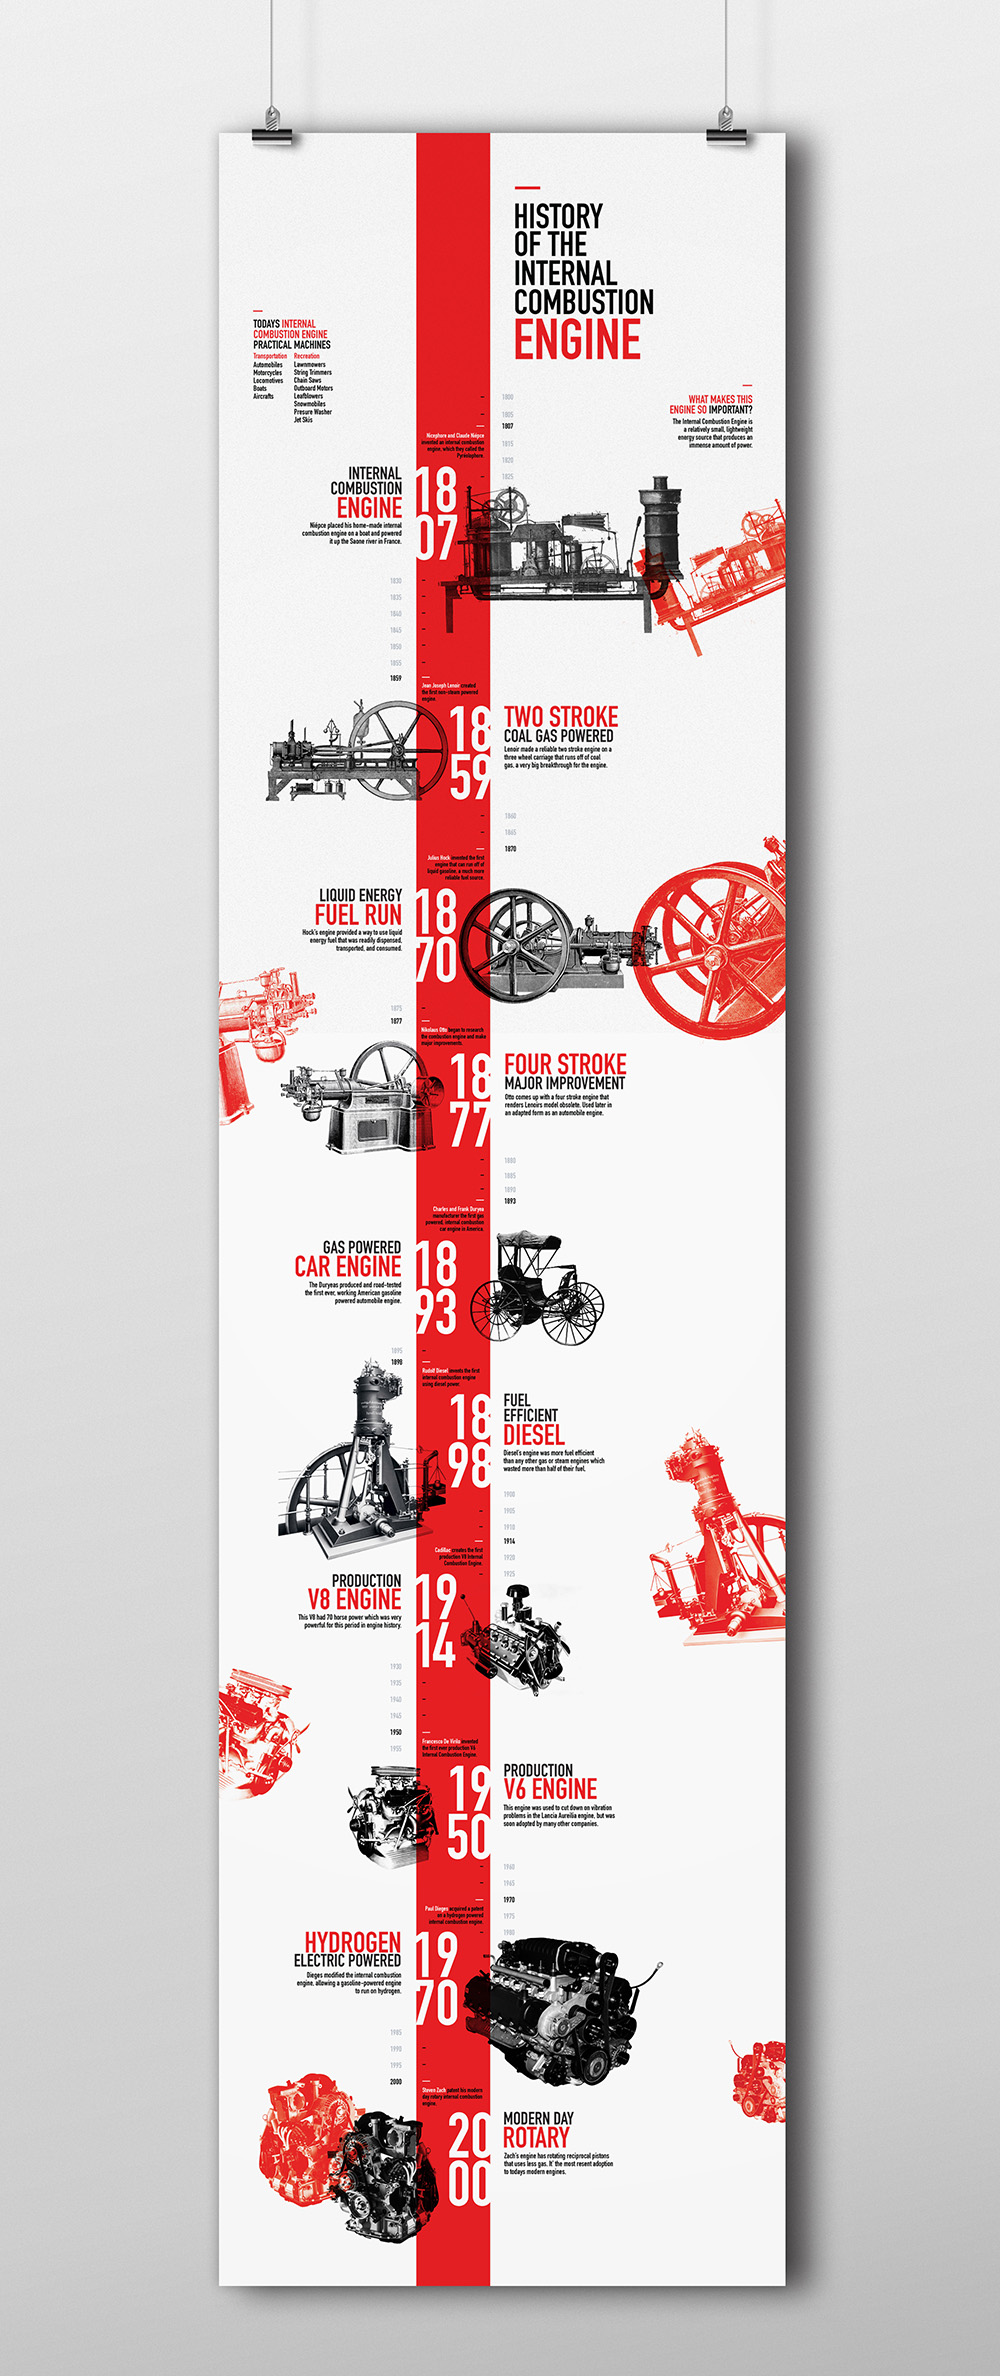 15+ Timeline Infographic Design Examples & Ideas - Daily Design Inspiration #18 | Venngage Gallery